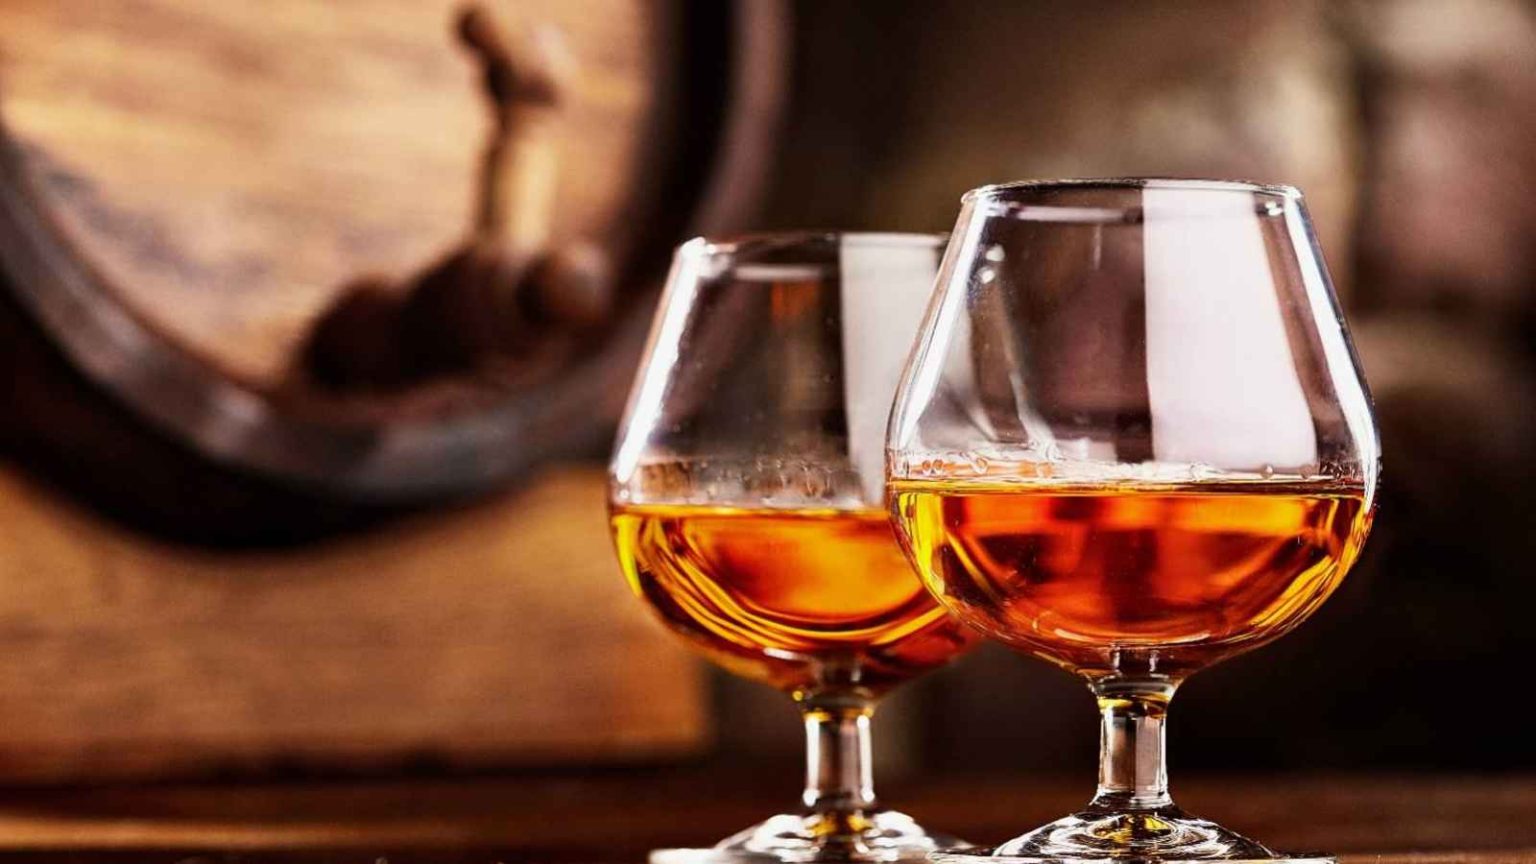 National Cognac Day 2023 Date, History, Facts about Ugni Blanc